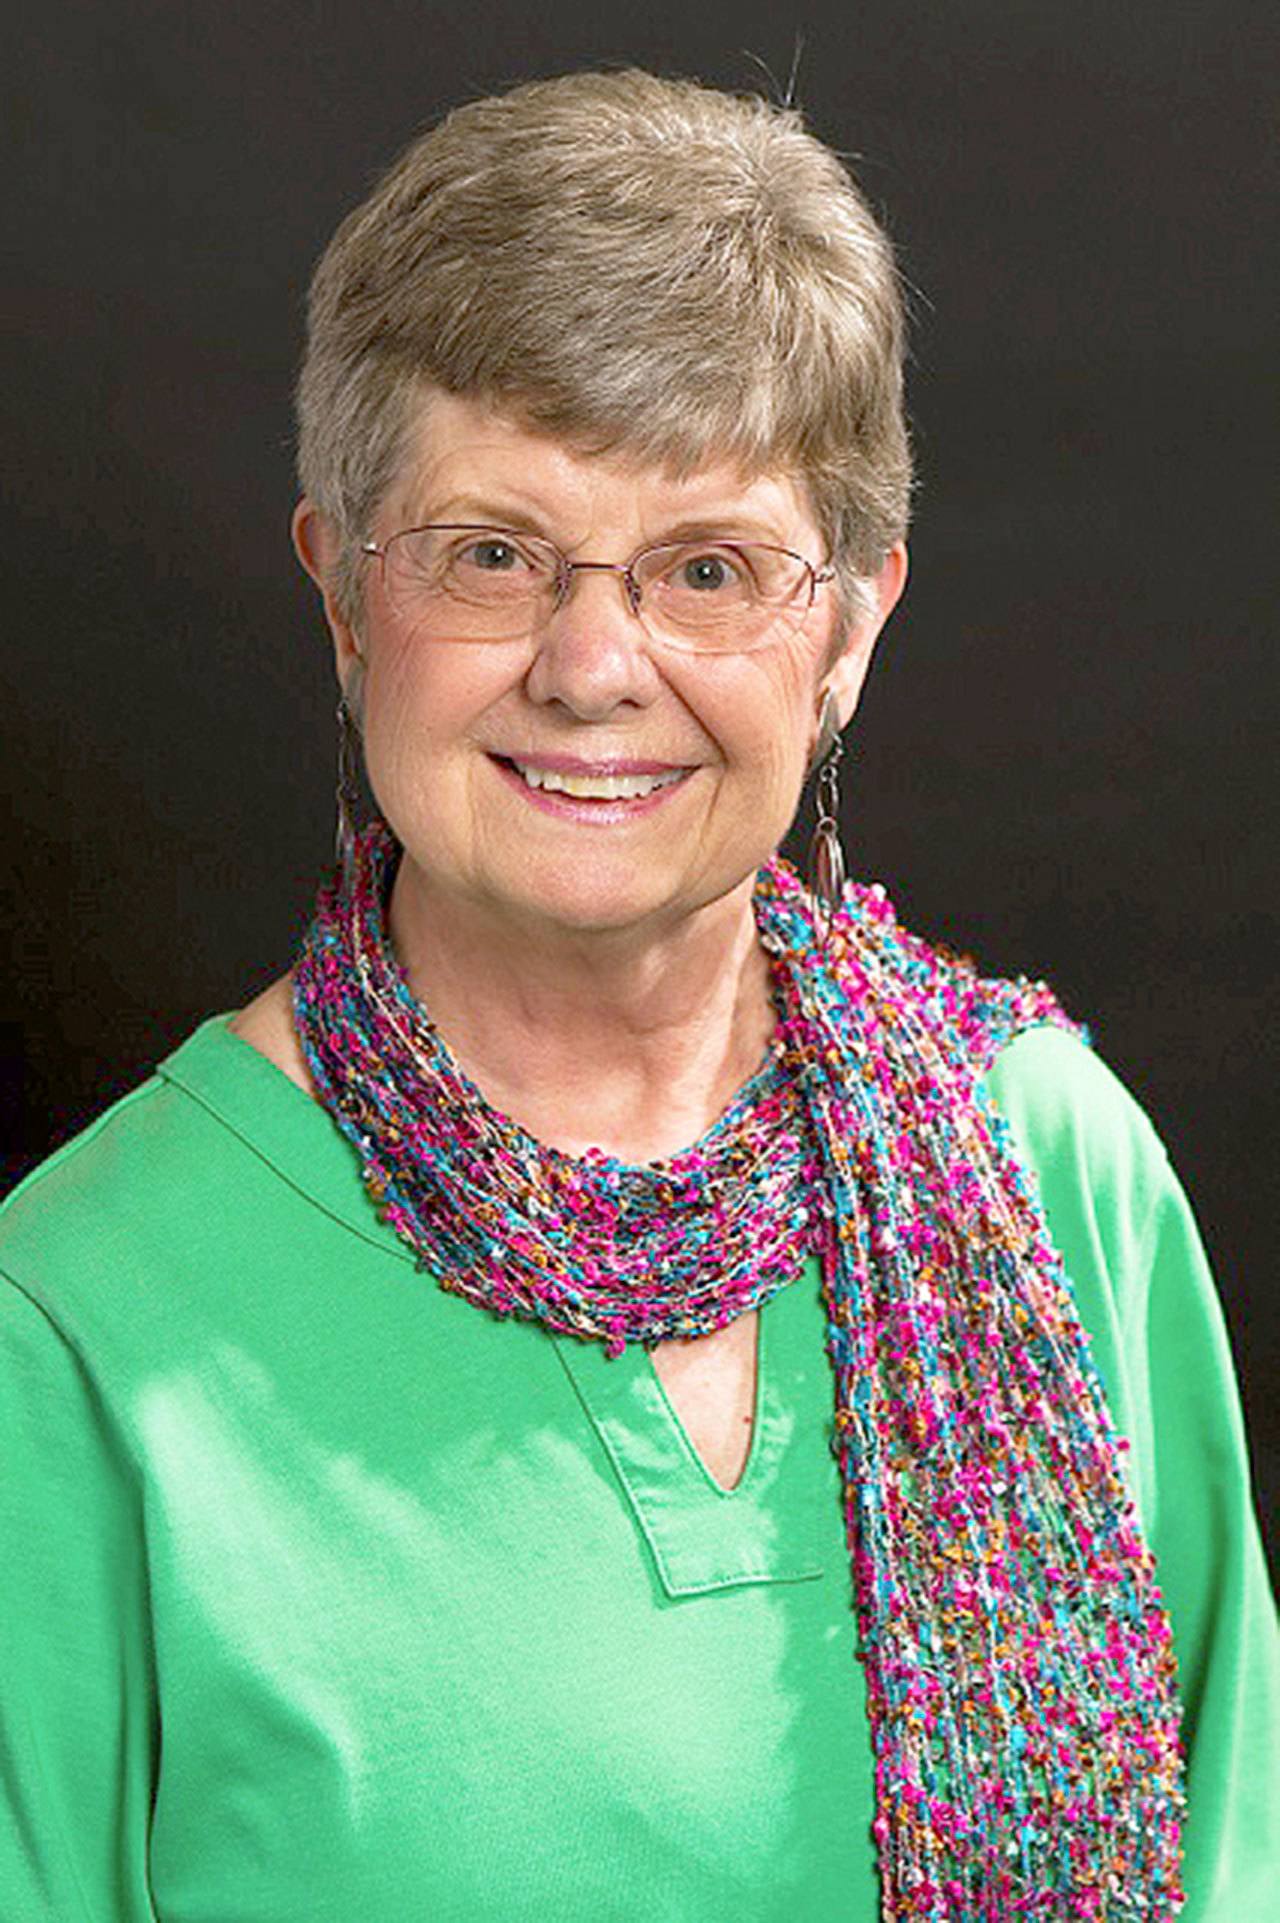 Dorothy Van Soest, an educator, writer, activist and lecturer with the Humanities Washington Speakers Bureau, this week will lead a series of talks about about capital punishment in the United States at libraries across Clallam County. (Dorothy Van Soest)